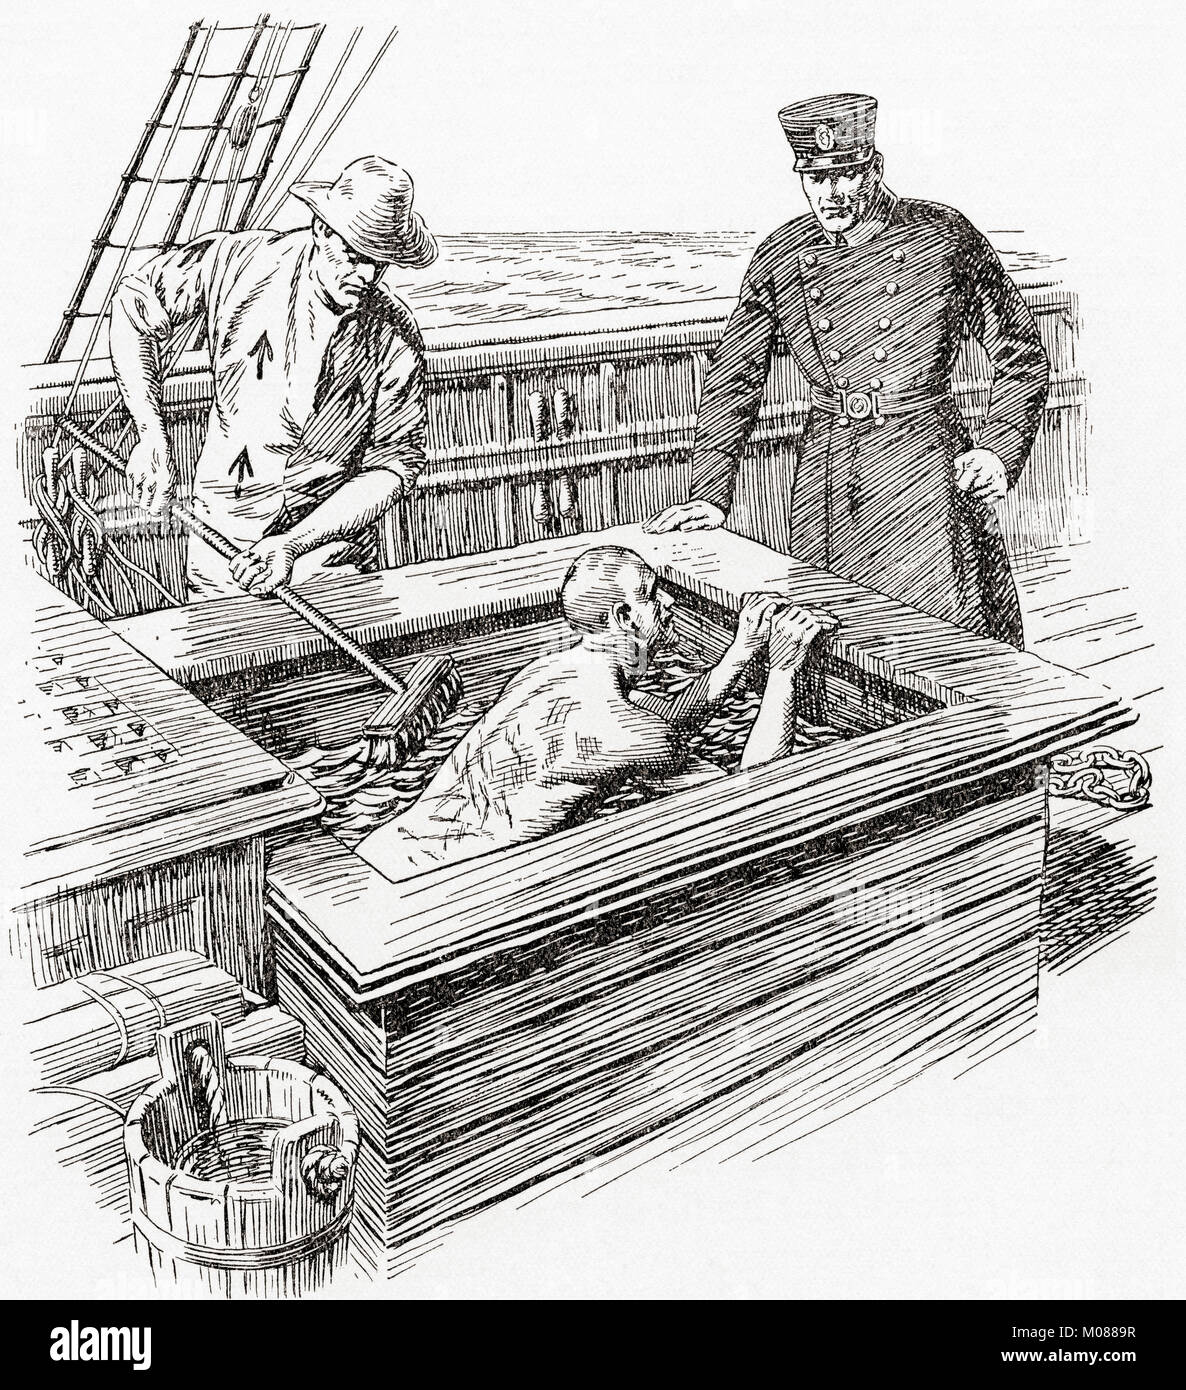 The Brine Bath on board a prison hulk in the early 19th century. The brine bath aka coffin bath was where the prisoners were put after being flogged, their backs were scubbed with salt water causing dreadful suffering.  From The Martyrs of Tolpuddle, published 1934. Stock Photo